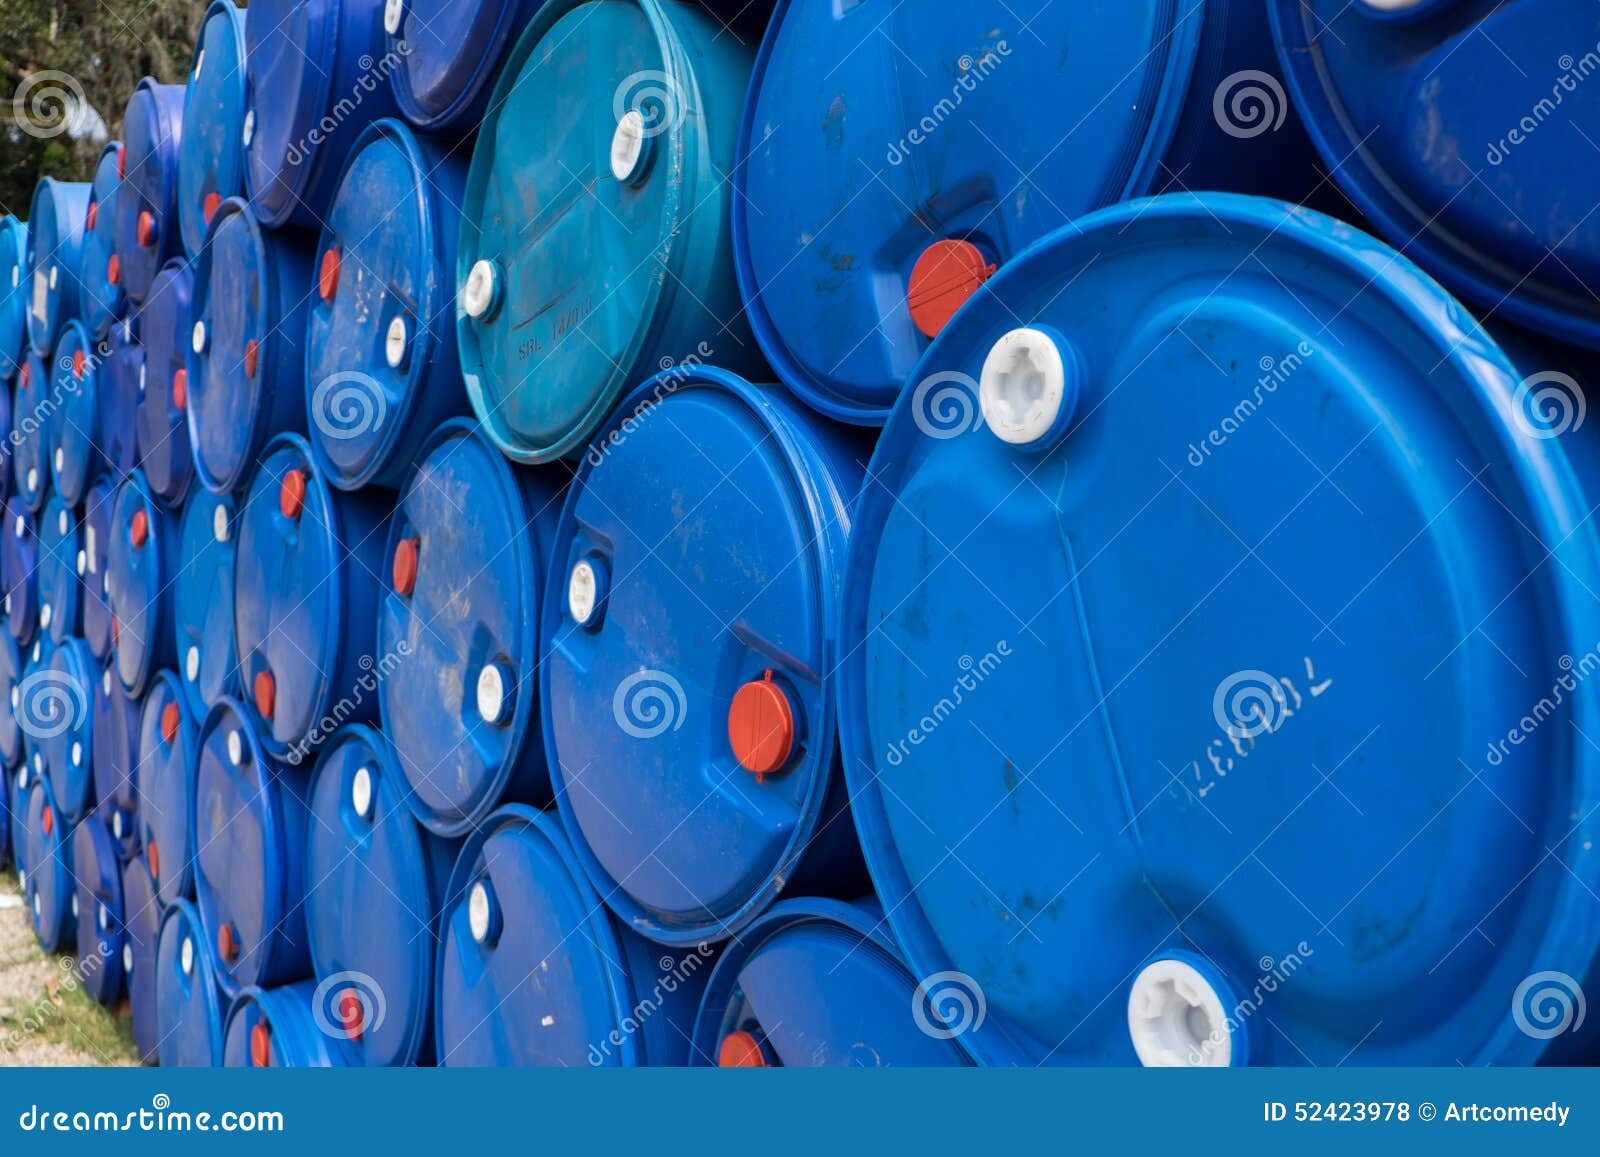 water in blue plastic 200 litre